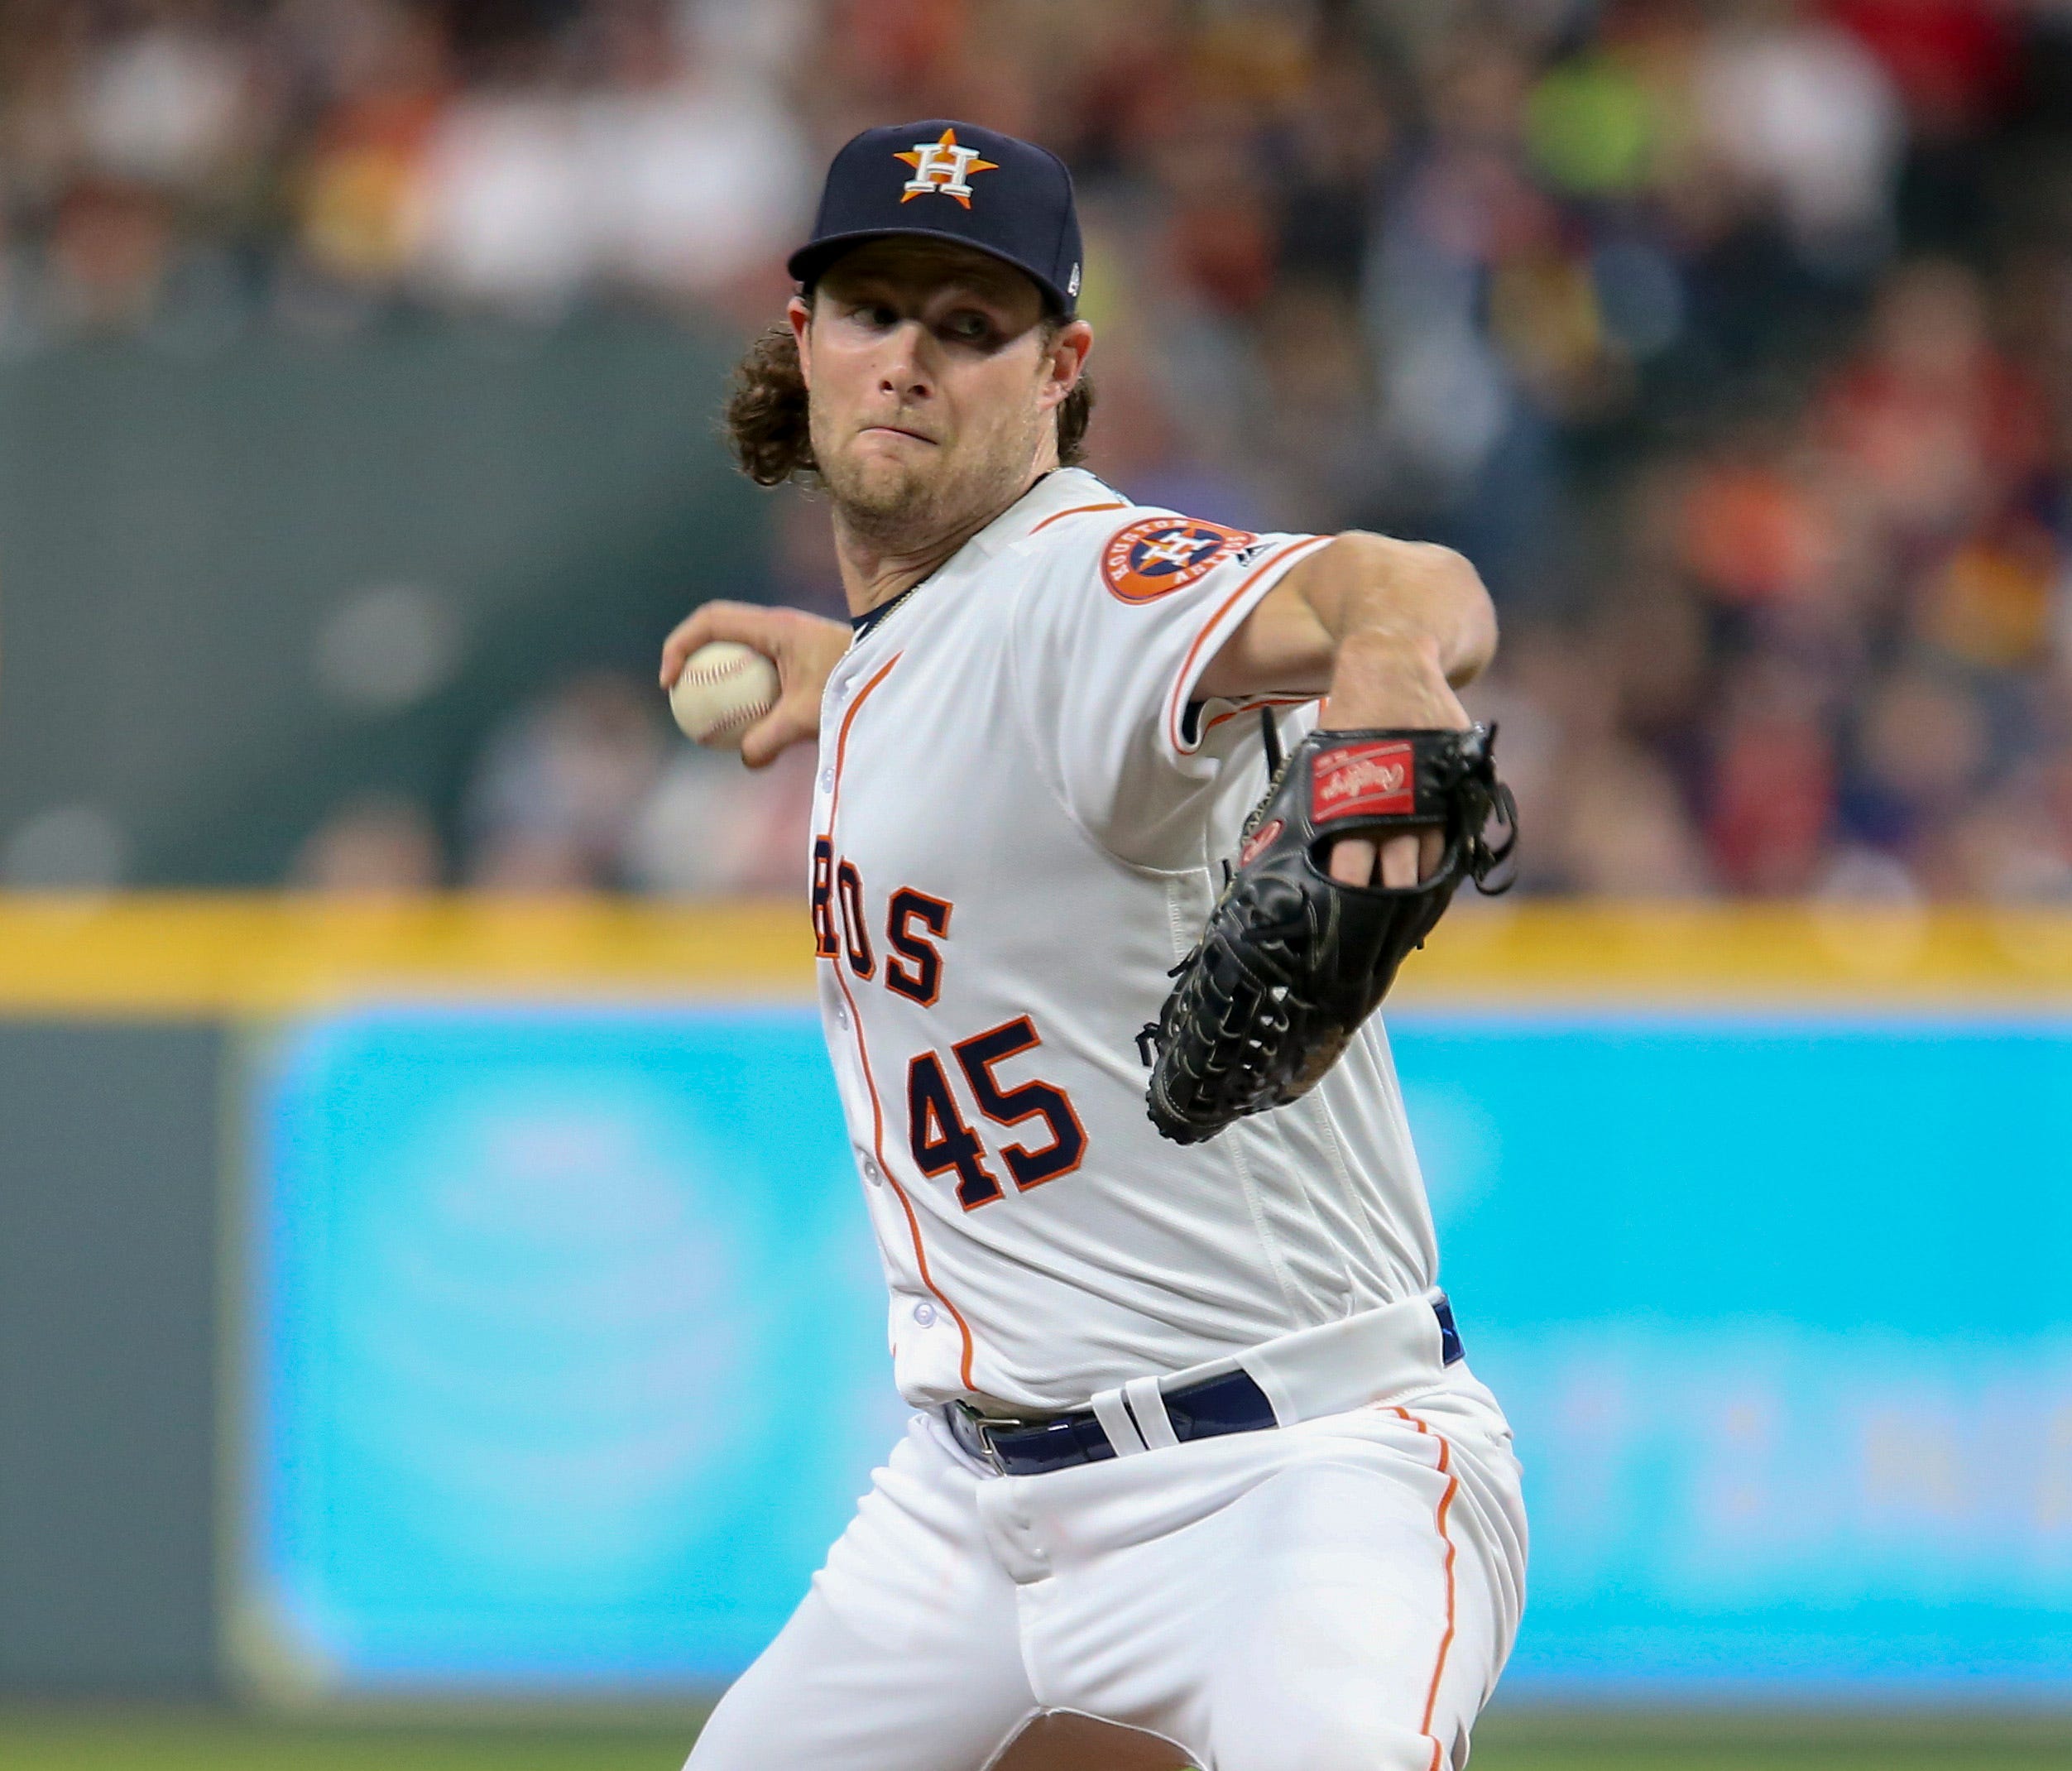 Gerrit Cole owns a 0.64 ERA after two starts with the Astros.